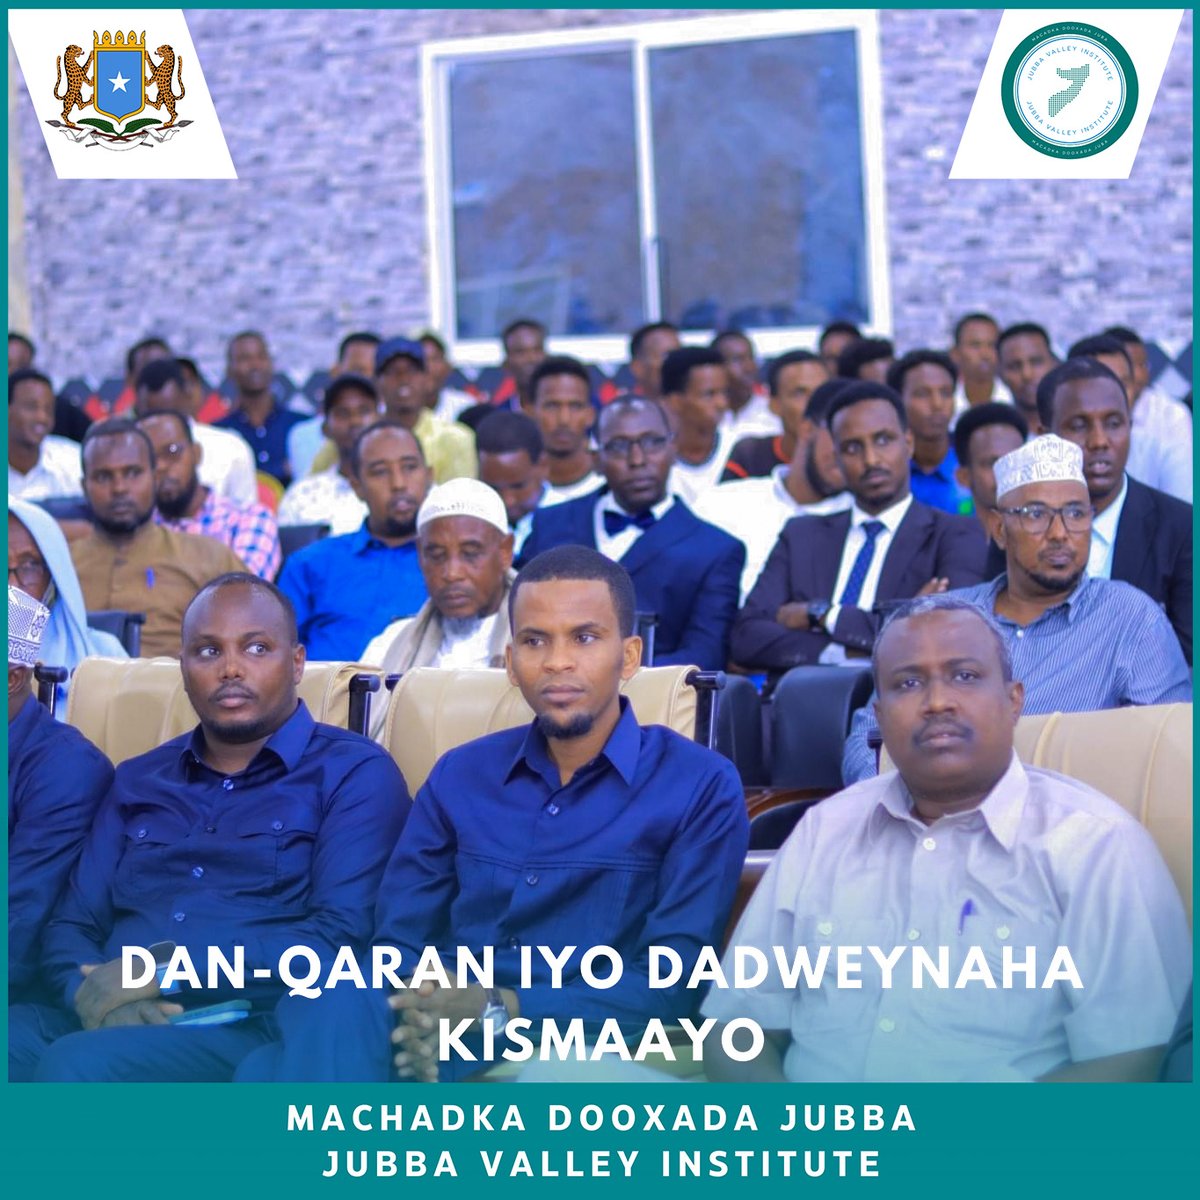 The JVI-hosted town-hall is underway in Kismayo with PM H.E Hamza Abdi Barre addressing hundreds of attendees present for the discussion. The PM is addressing questions related to politics and social as well as security affairs. #DanQaranIyoDadweynahaKismaayo #JVI